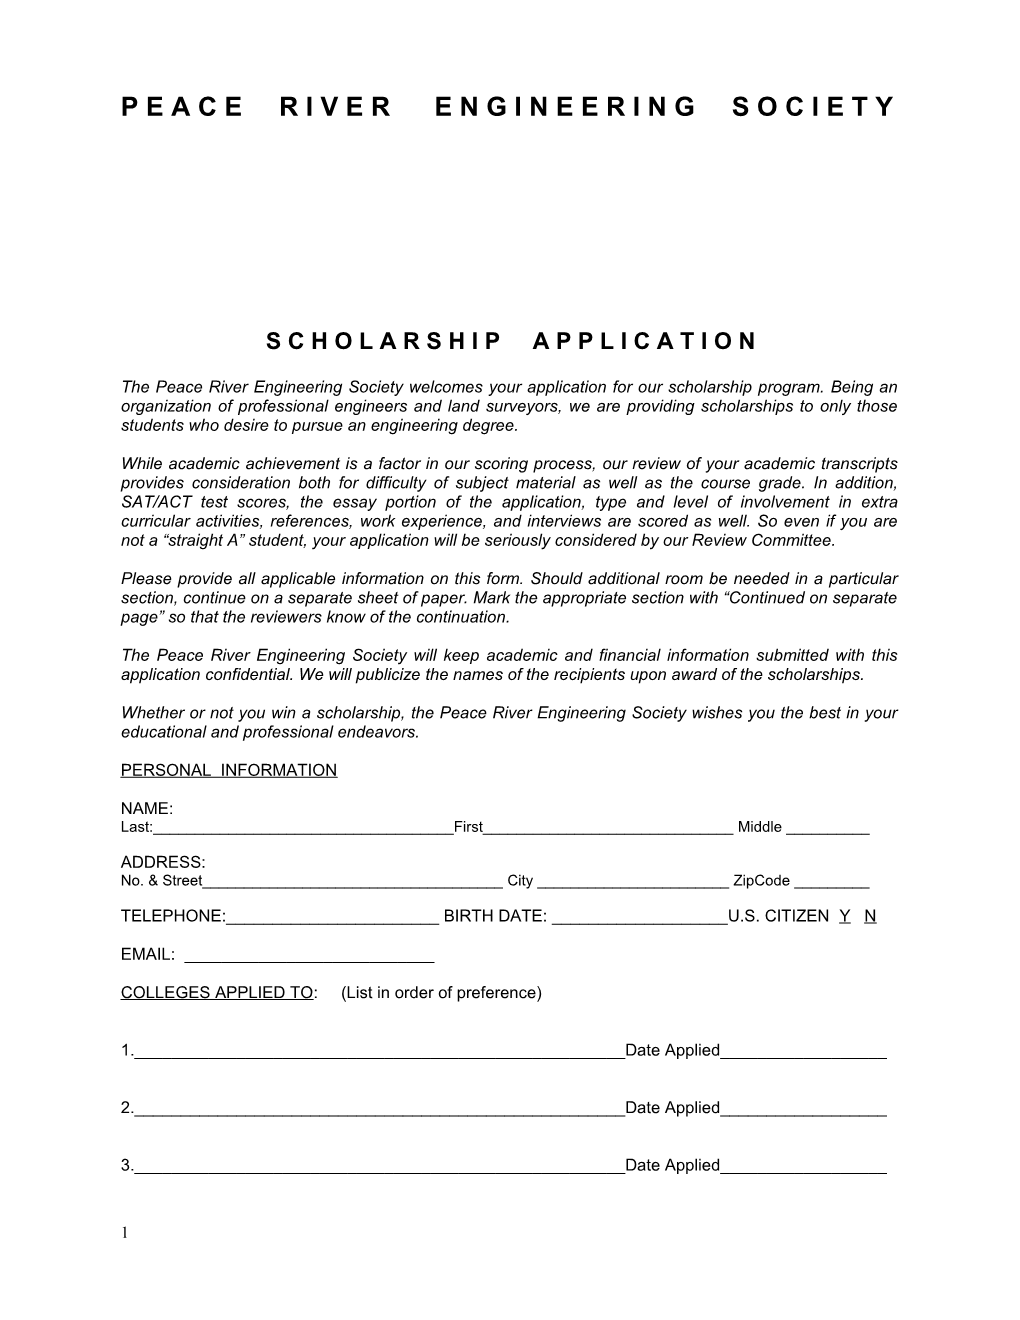 The Peace River Engineering Society Welcomes Your Application for Our Scholarship Program